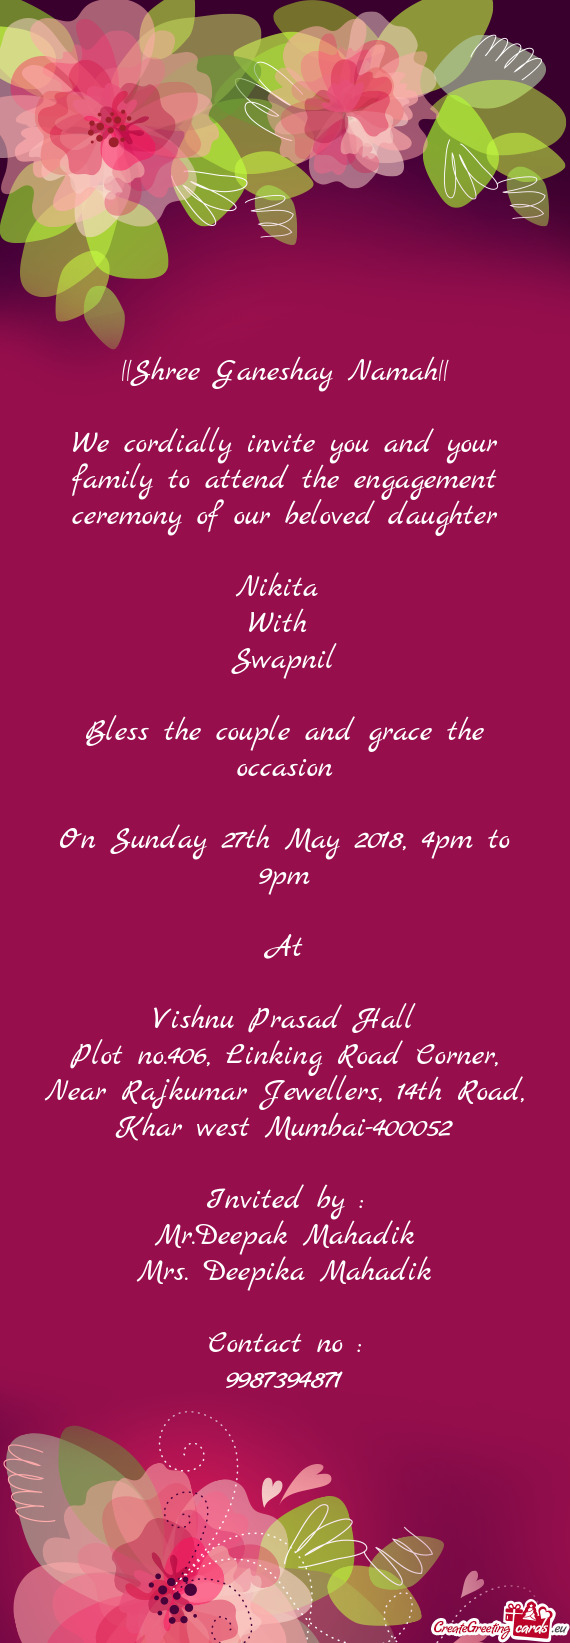 We cordially invite you and your family to attend the engagement ceremony of our beloved daughter